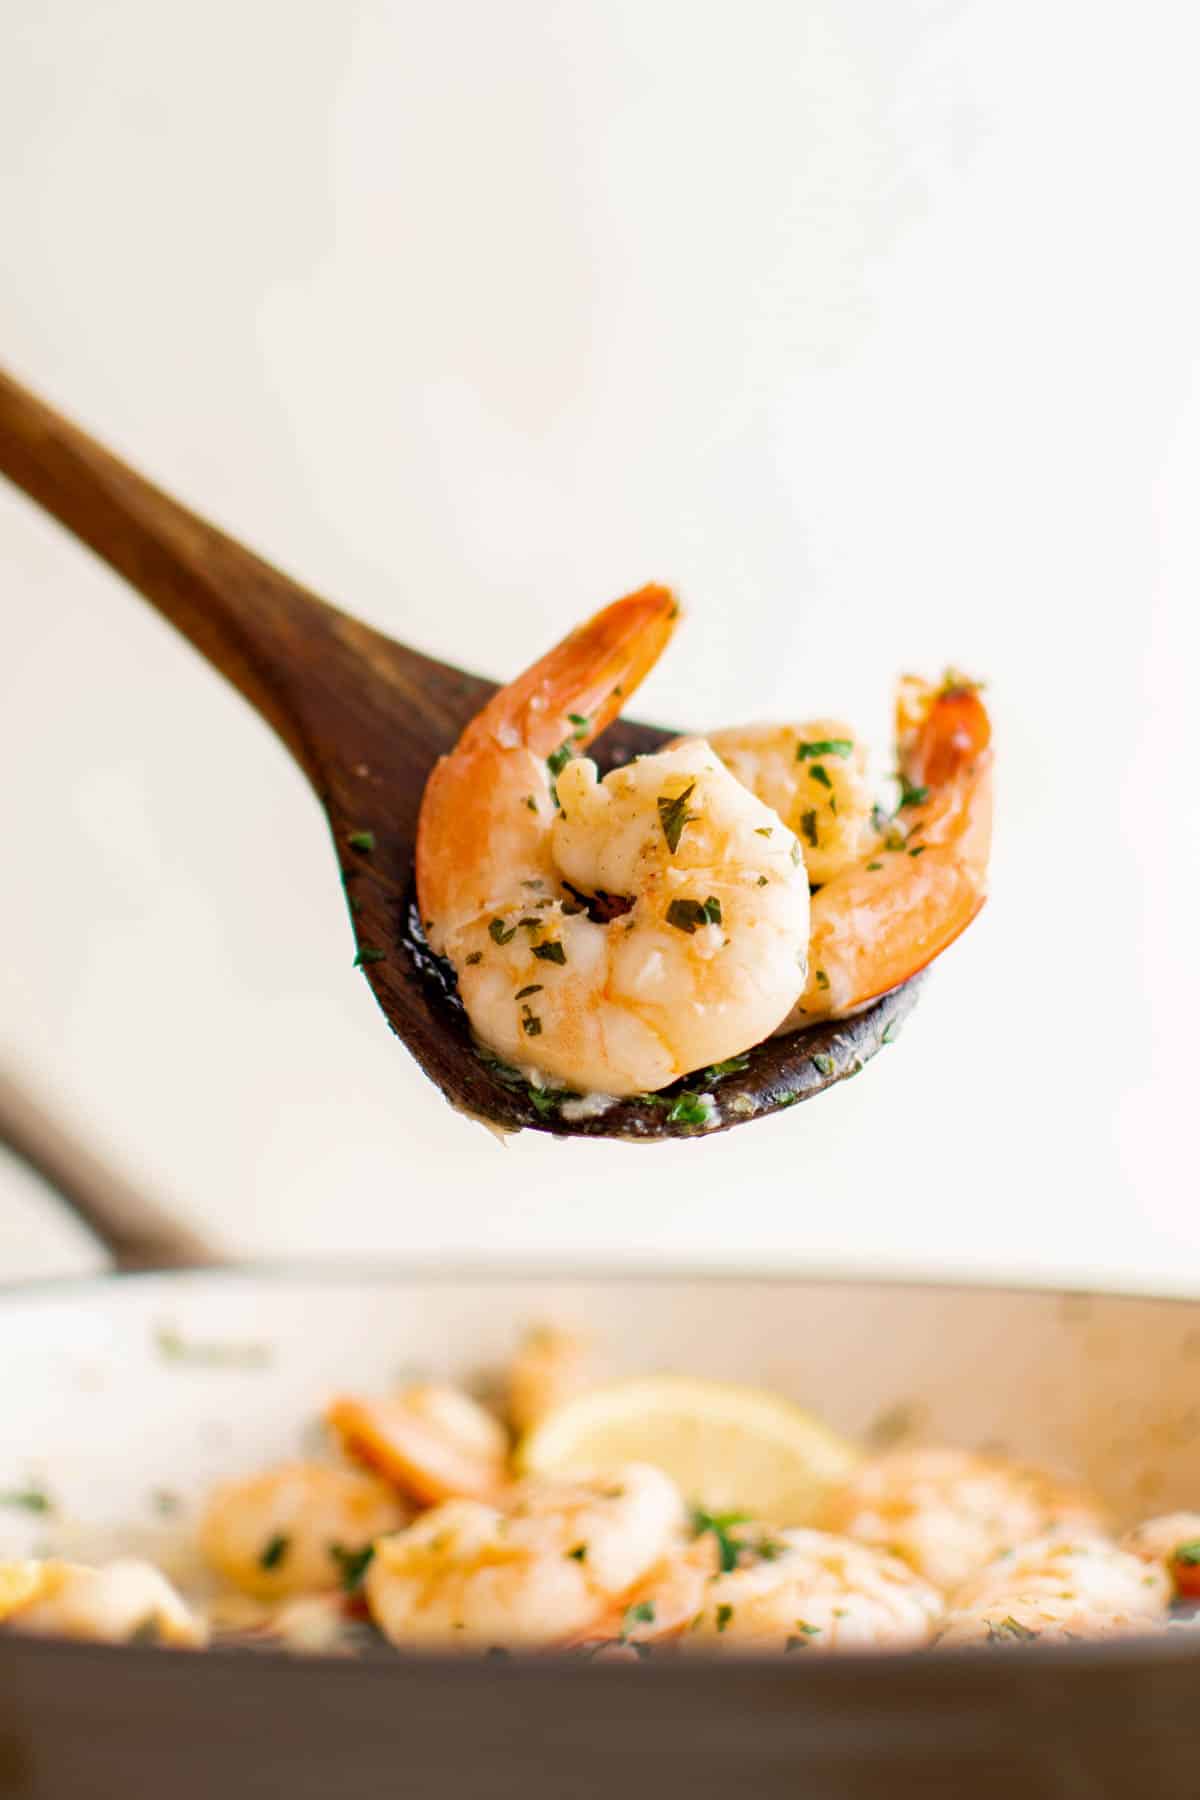 A wooden spoon serving two pieces of lemon garlic shrimp from the pan.